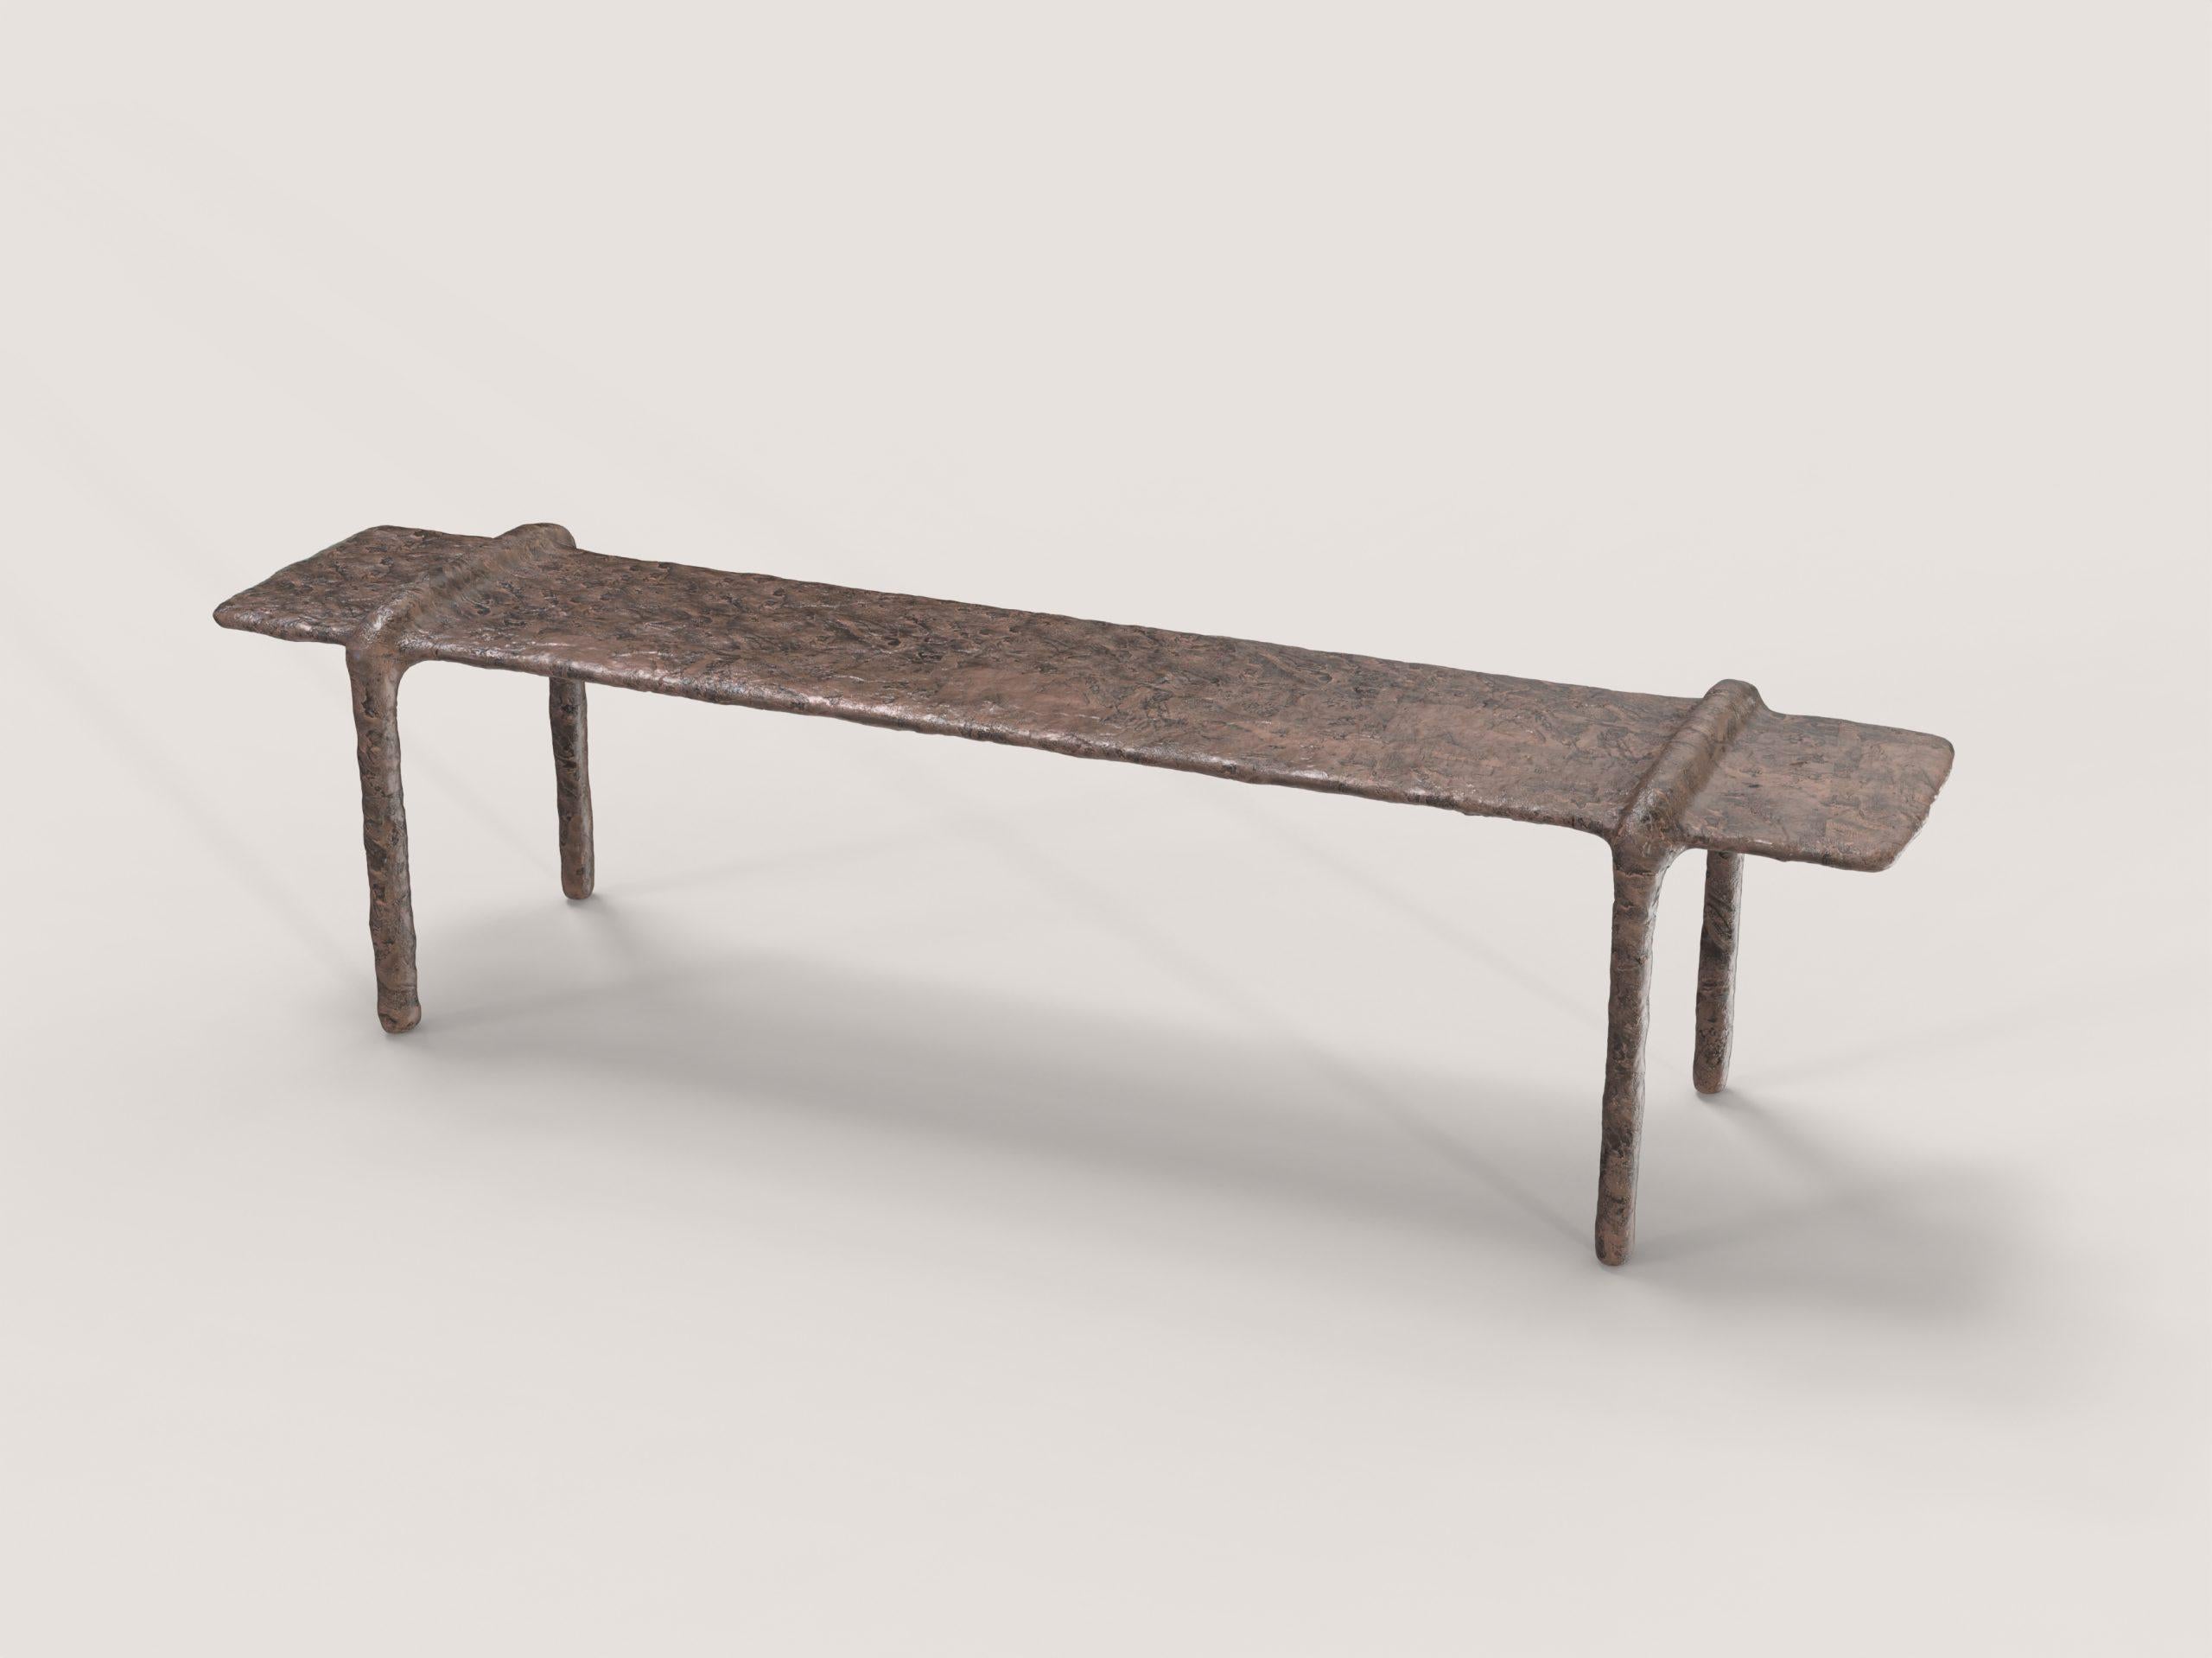 Ala V2 Low Table by Edizione Limitata
Limited Edition of 150 pieces. Signed and numbered.
Dimensions: D 38 x W 160 x H 43 cm.
Materials: cast bronze.

This low table also can be used as a bench. Please contact us.

Edizione Limitata, that is